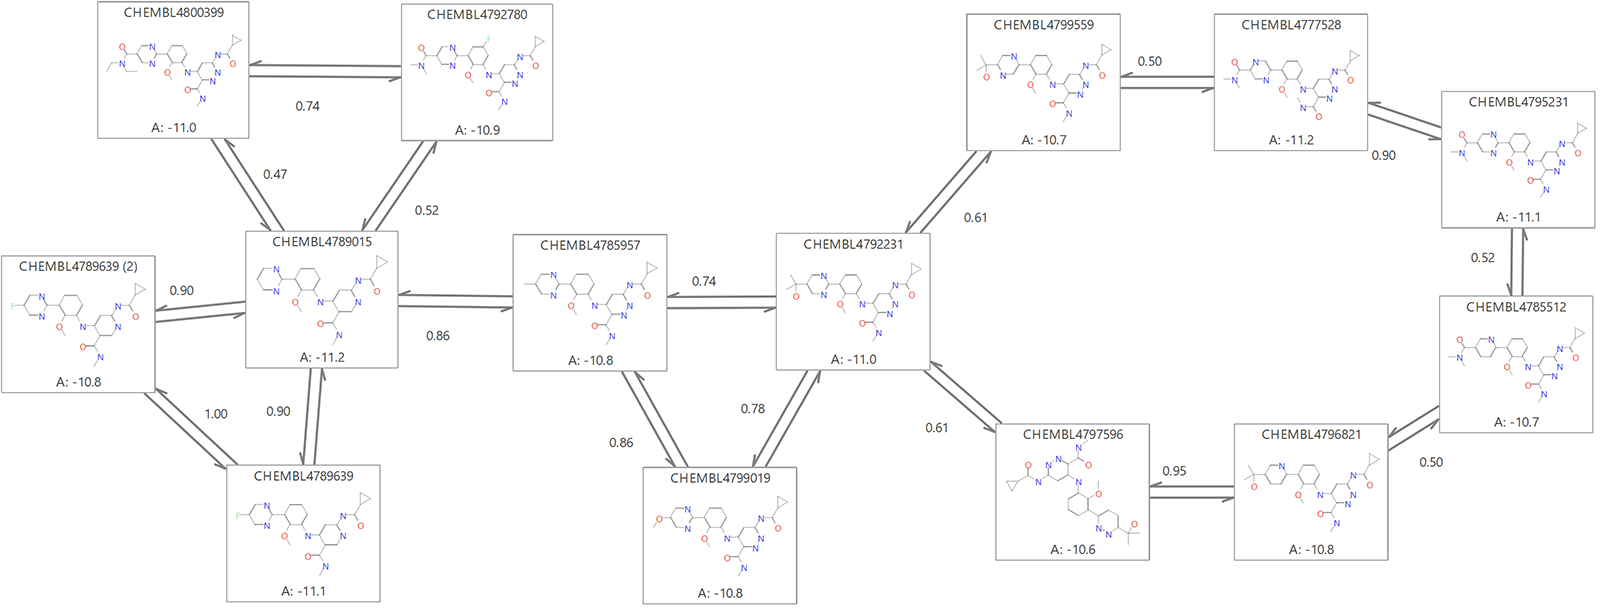 Images of the FEP map for the validation and prediction of compound collections